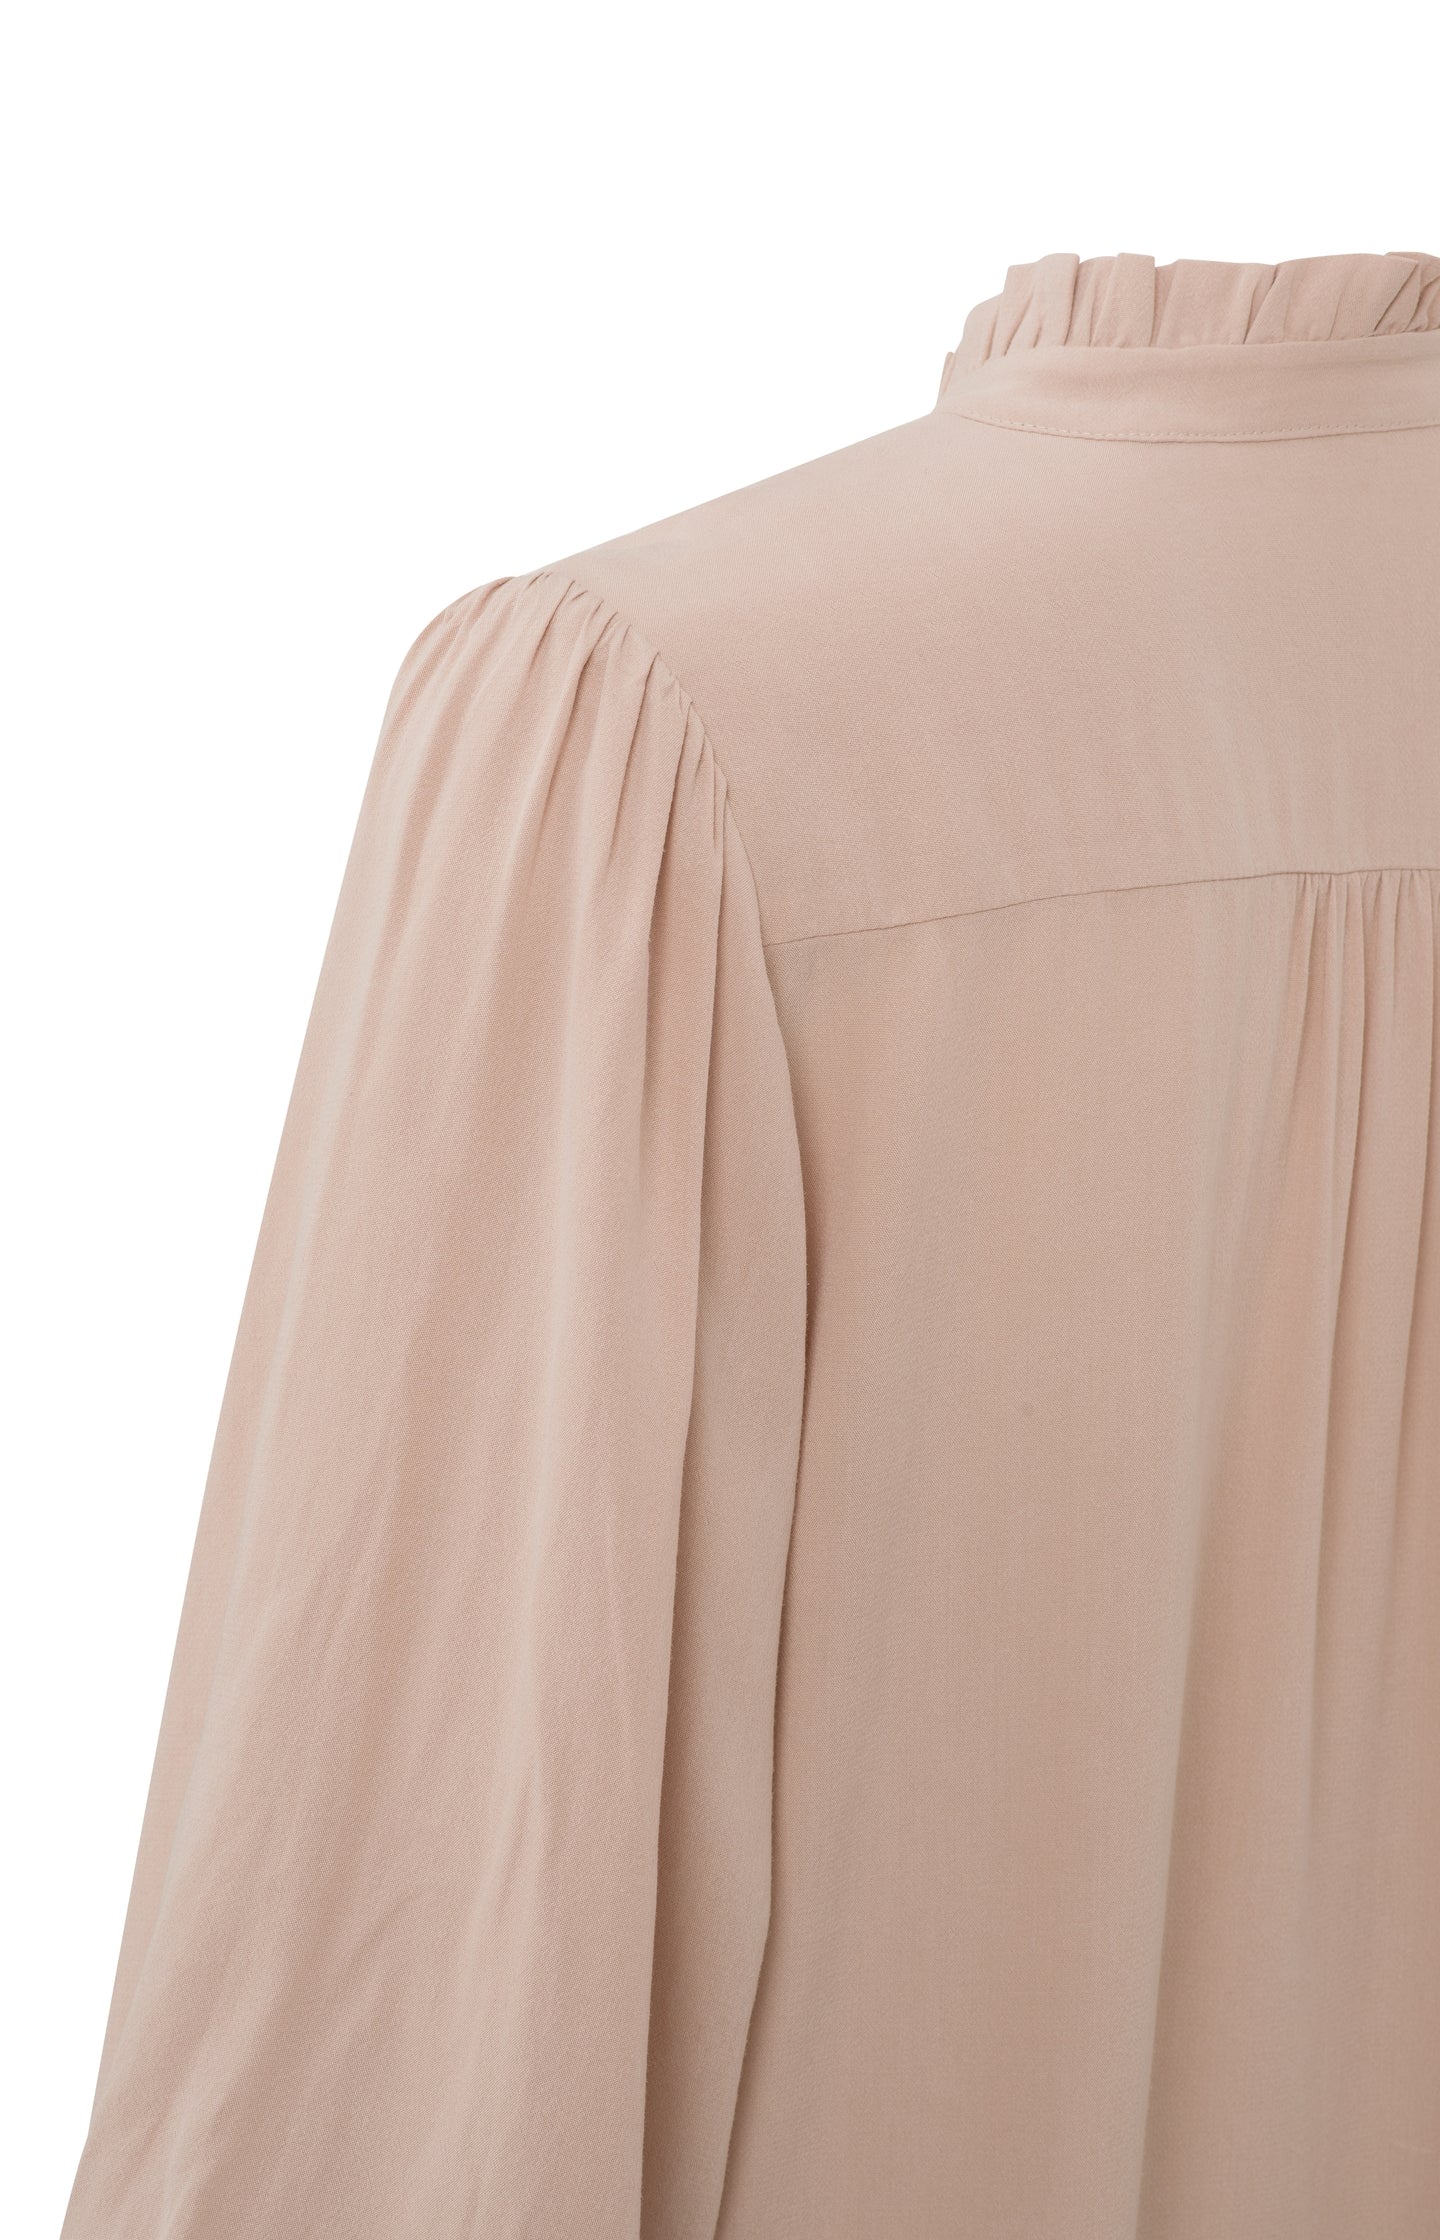 Blouse with half-long sleeves, a ruffled neck and buttons